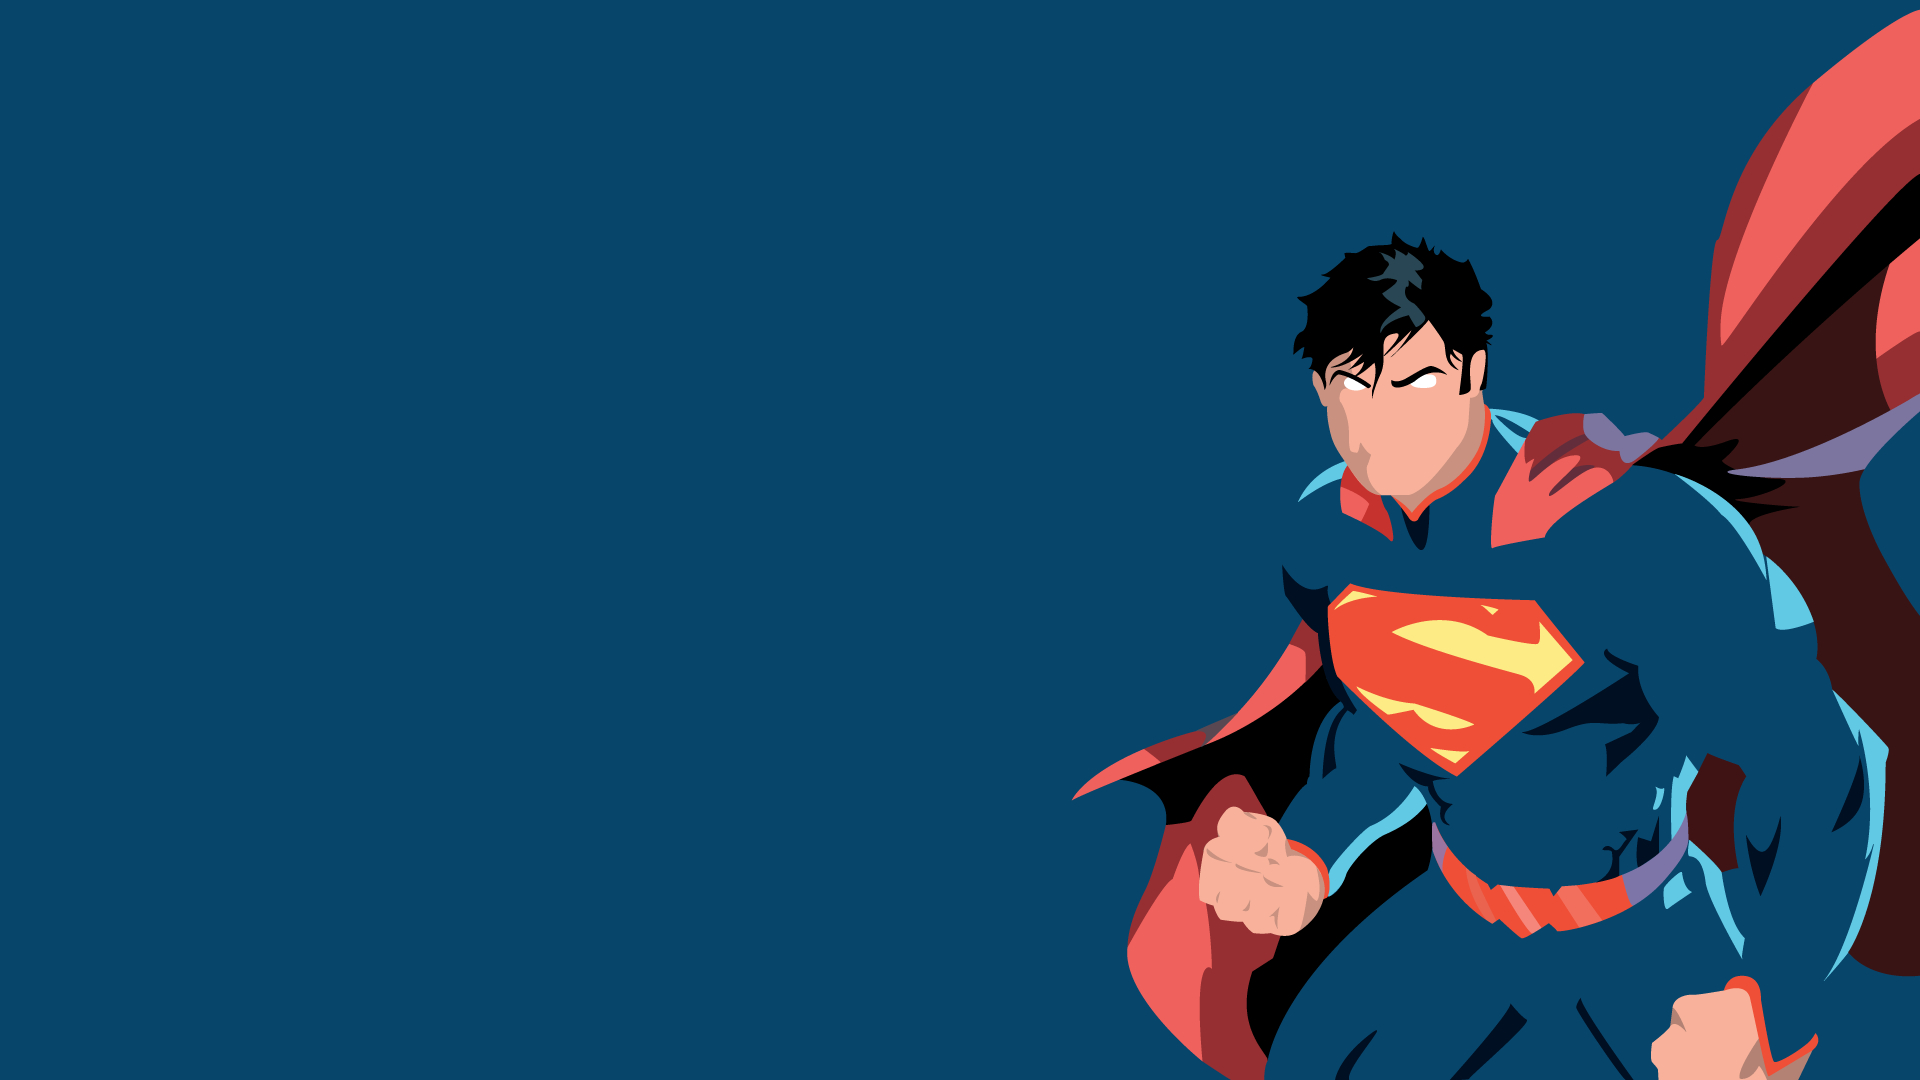 1920x1080 Superman Wallpaper | Superman wallpaper, Superman, Superman pictures